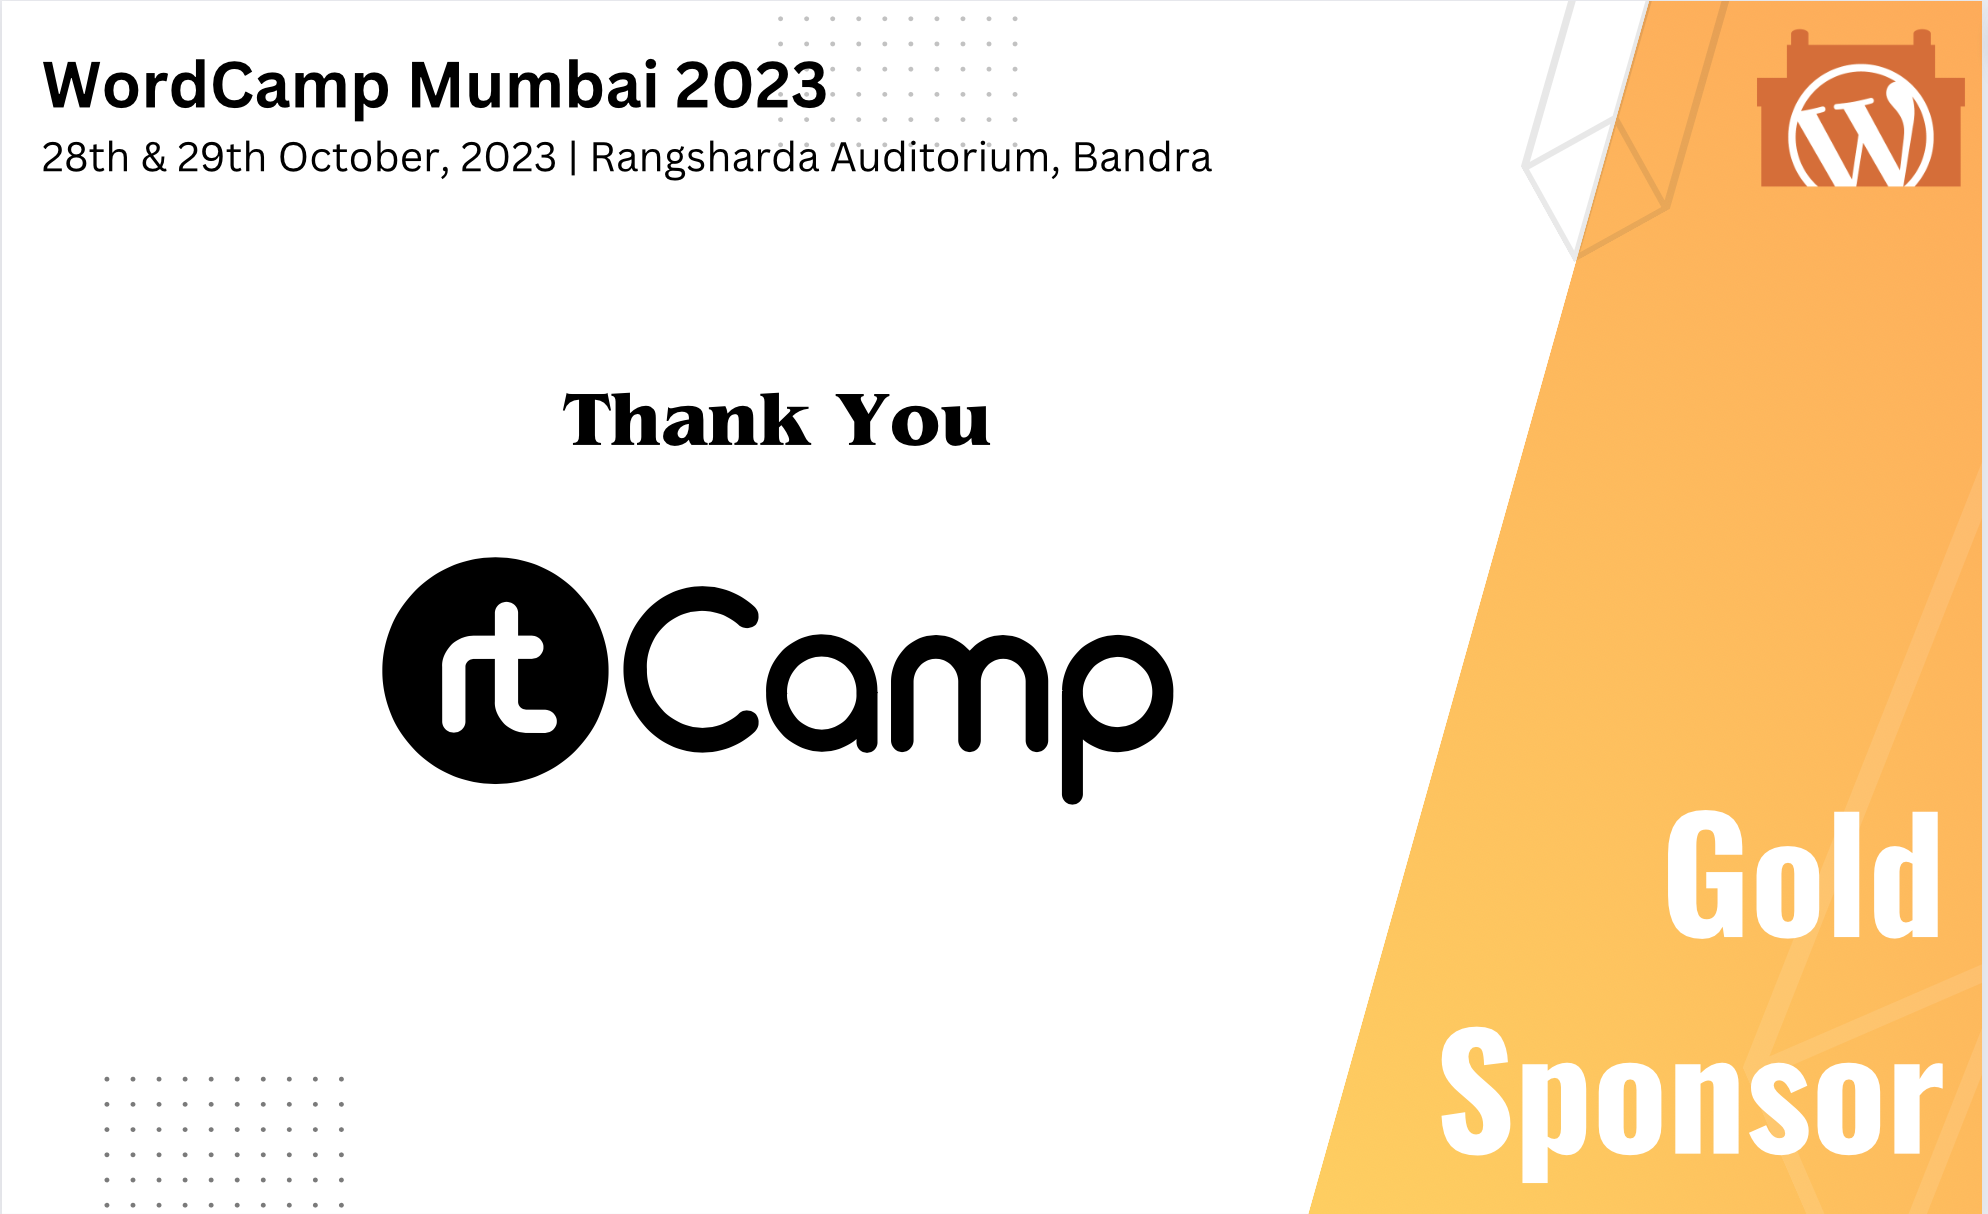 Thank You rtCamp, for being our Gold Sponsor